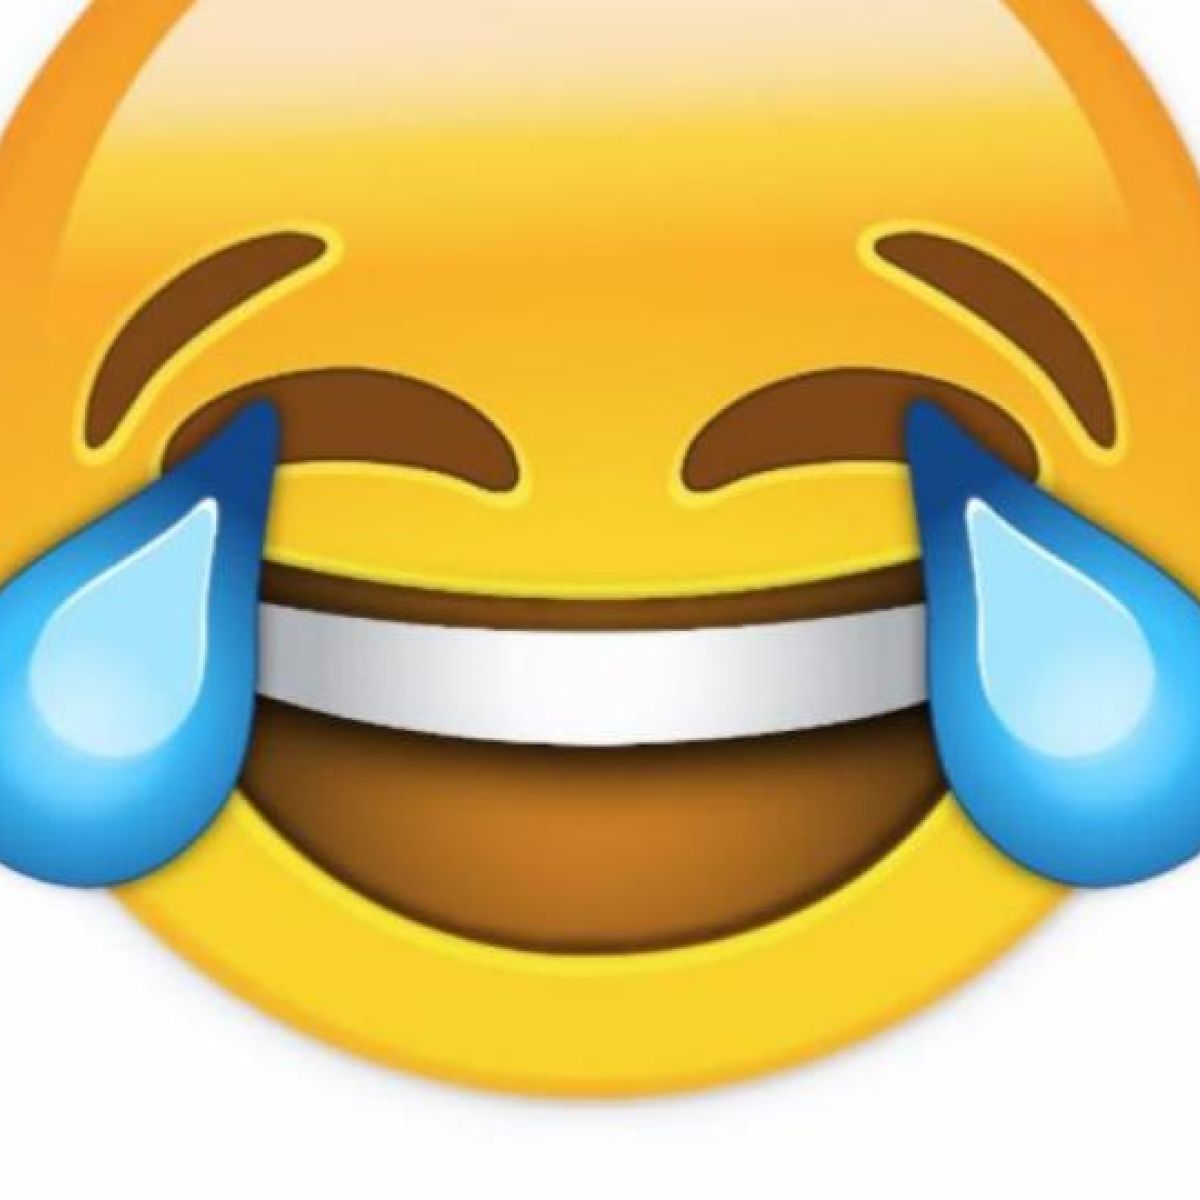 Donald Clarke The Curse Of The Crying Laughing Emoji Aka